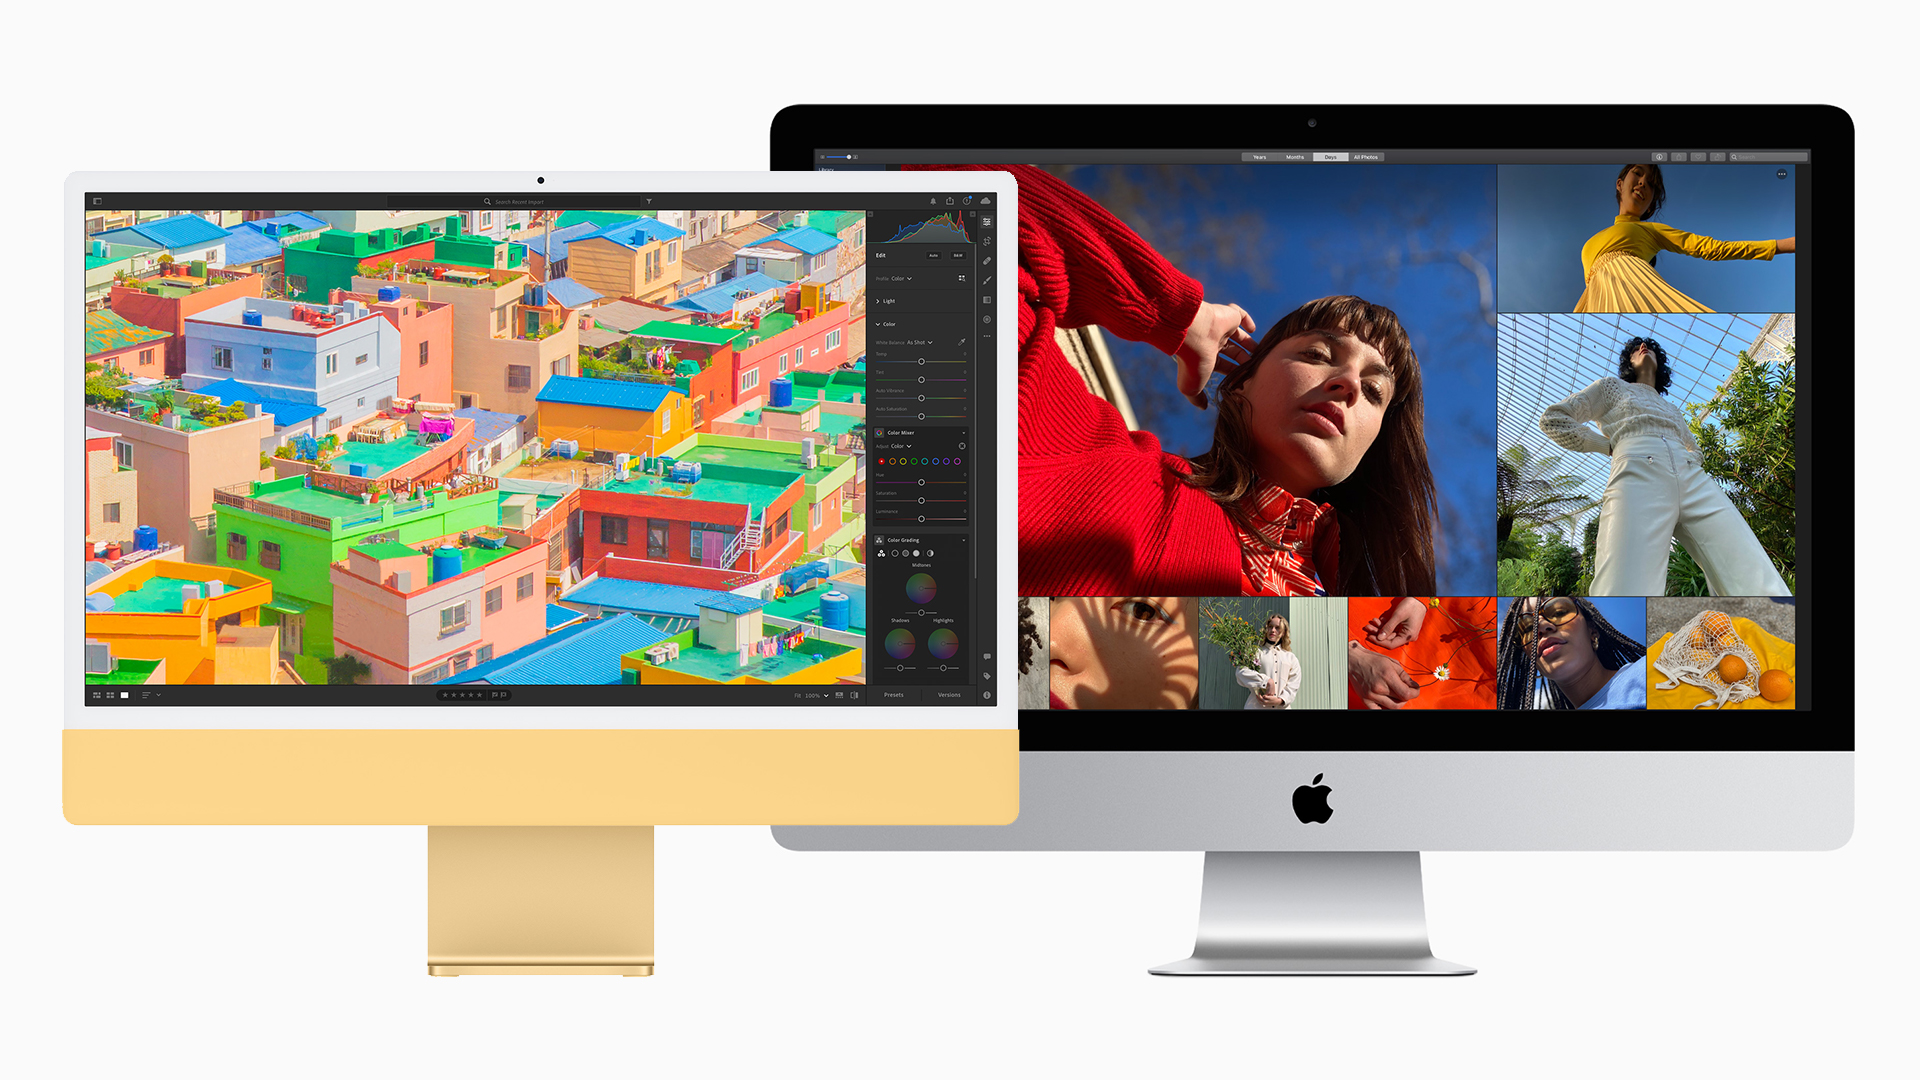 iMac 24 vs iMac 27: Which iMac is best for creatives? | Creative Bloq